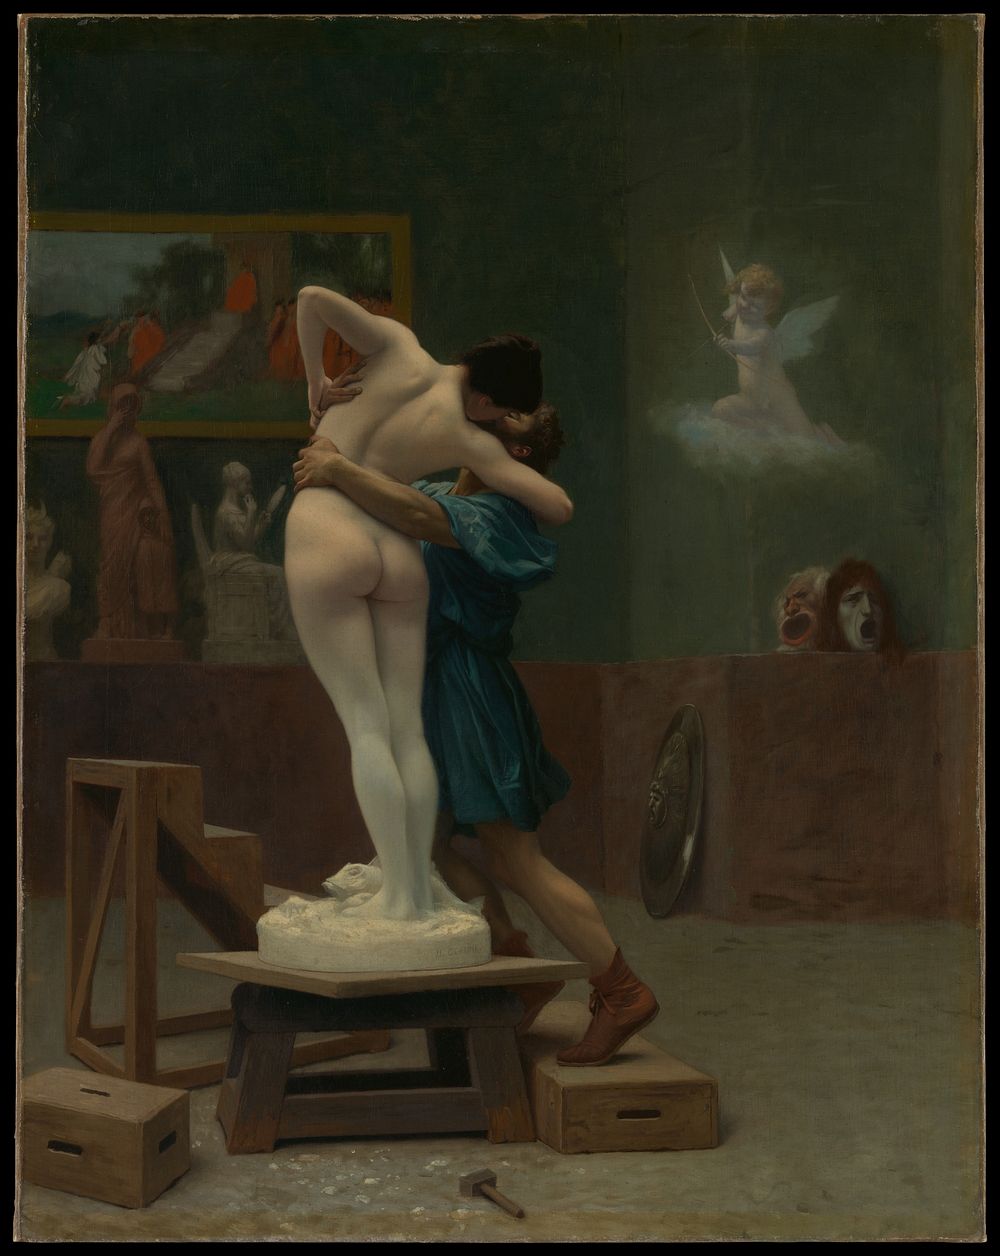 Pygmalion and Galatea(ca. 1890) painting by Jean&ndash;L&eacute;on G&eacute;r&ocirc;me.  